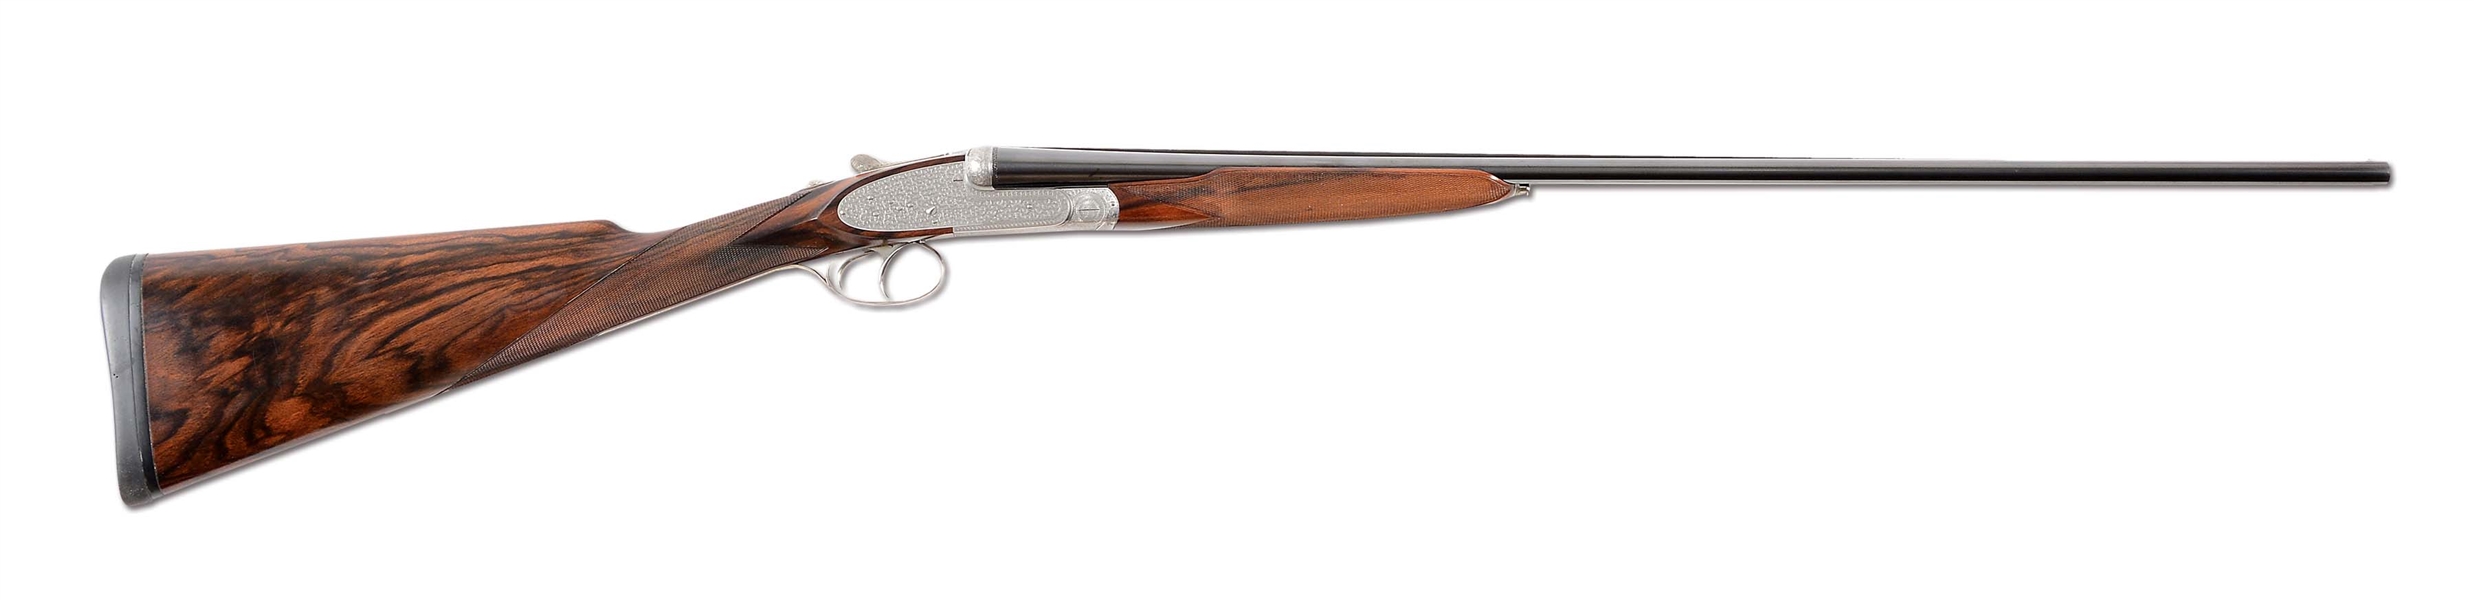 (M) SUPERB PIOTTI KING 1 SIDELOCK EJECTOR .410 BORE  SHOTGUN. THE FIRST  OF A FIVE GUN SET, AND FEATURED IN A DOUBLE GUN JOURNAL ARTICLE ENTITLED "SET FOR LIFE".